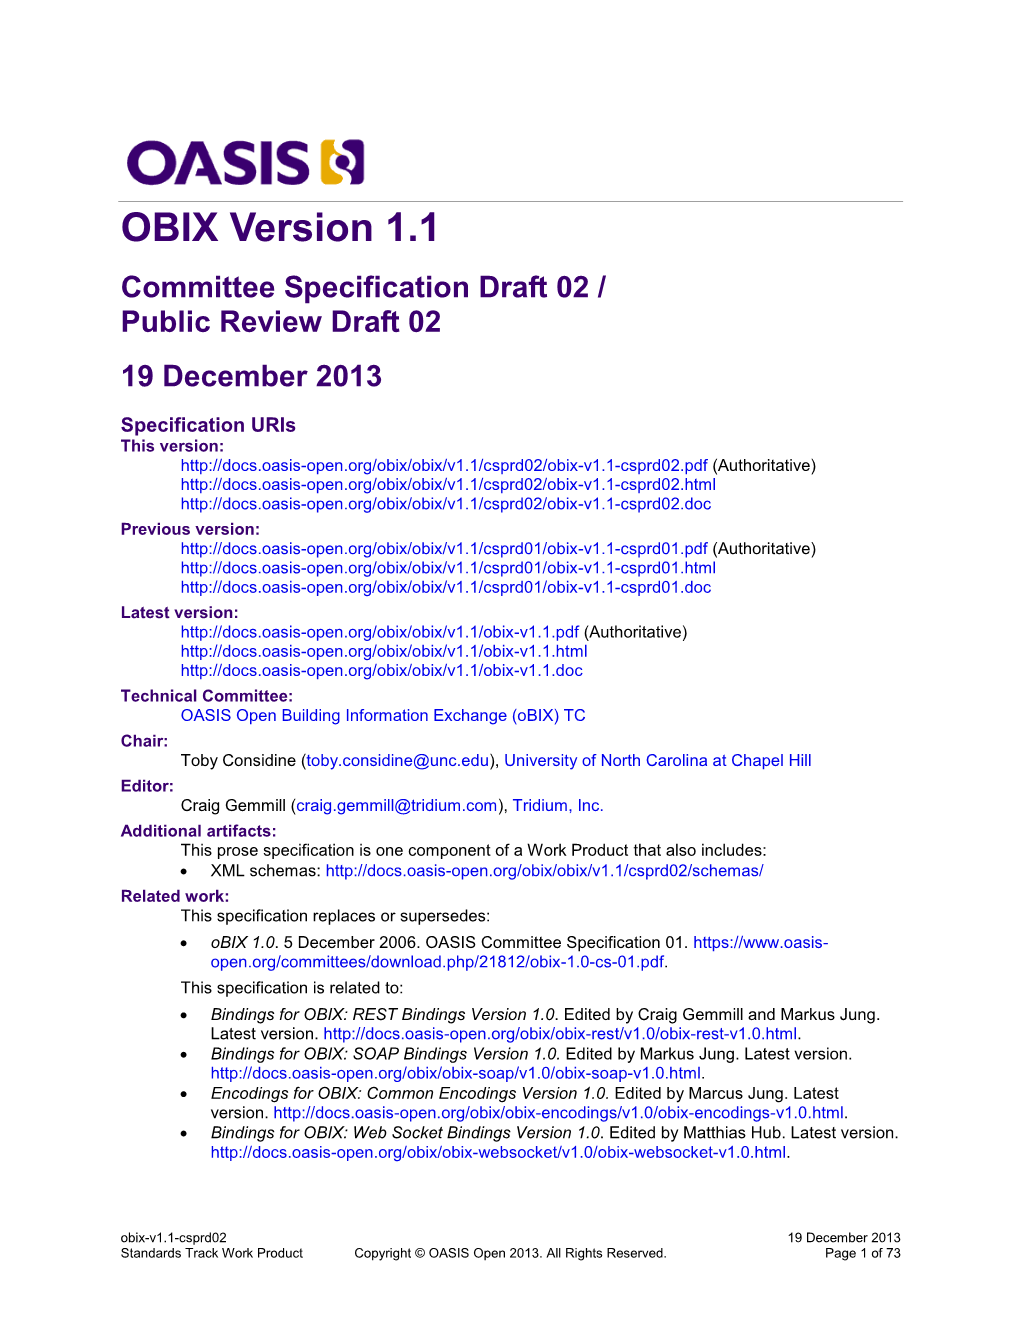 OBIX Version 1.1 Committee Specification Draft 02 / Public Review Draft 02 19 December 2013